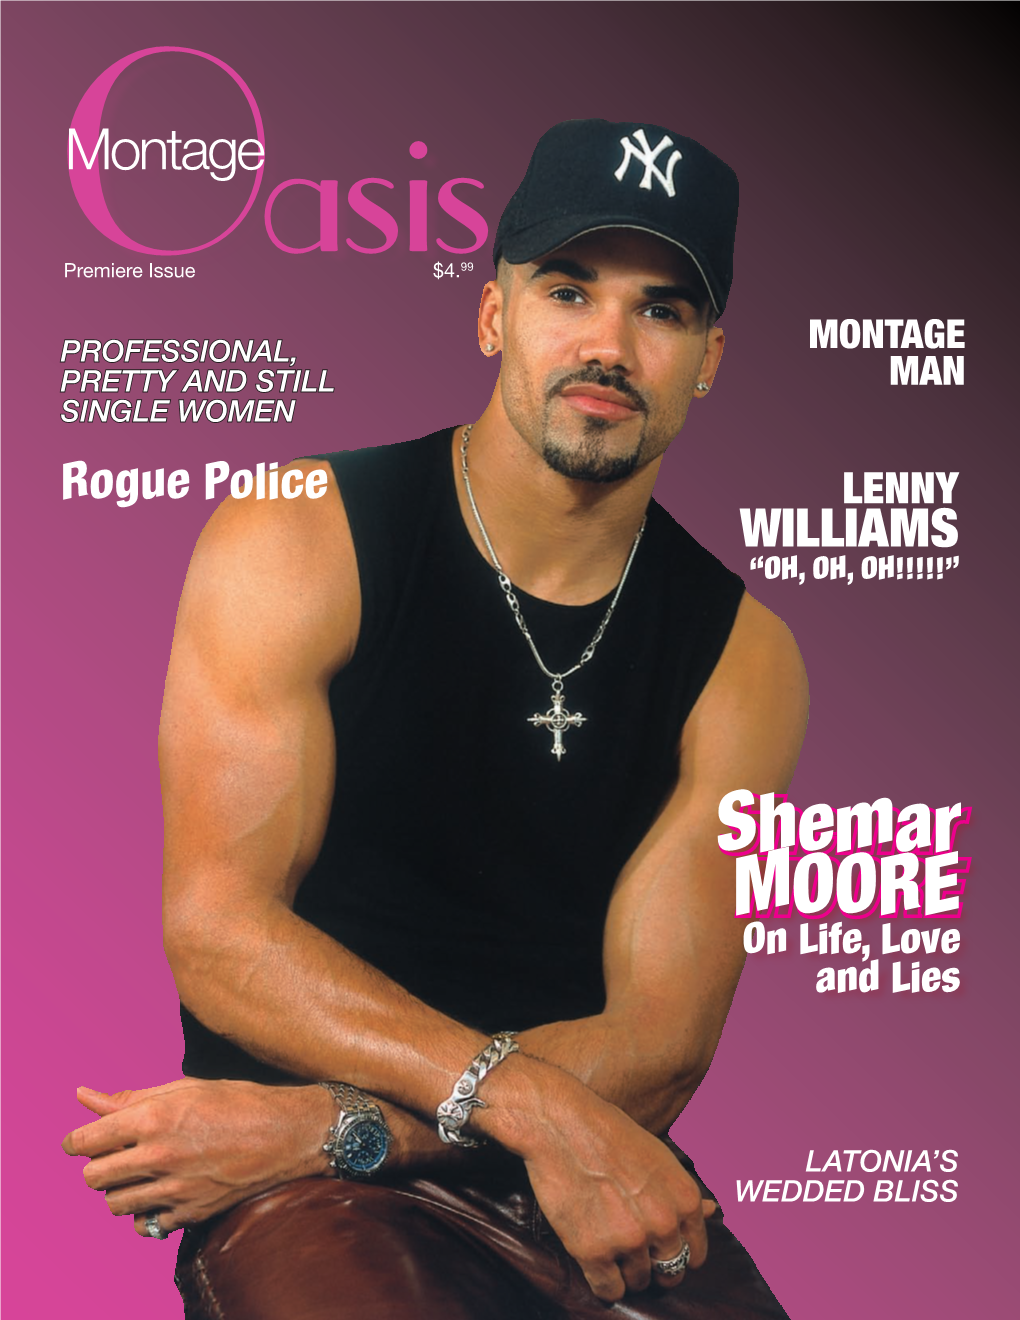 Shemar MOORE on Life, Love and Lies